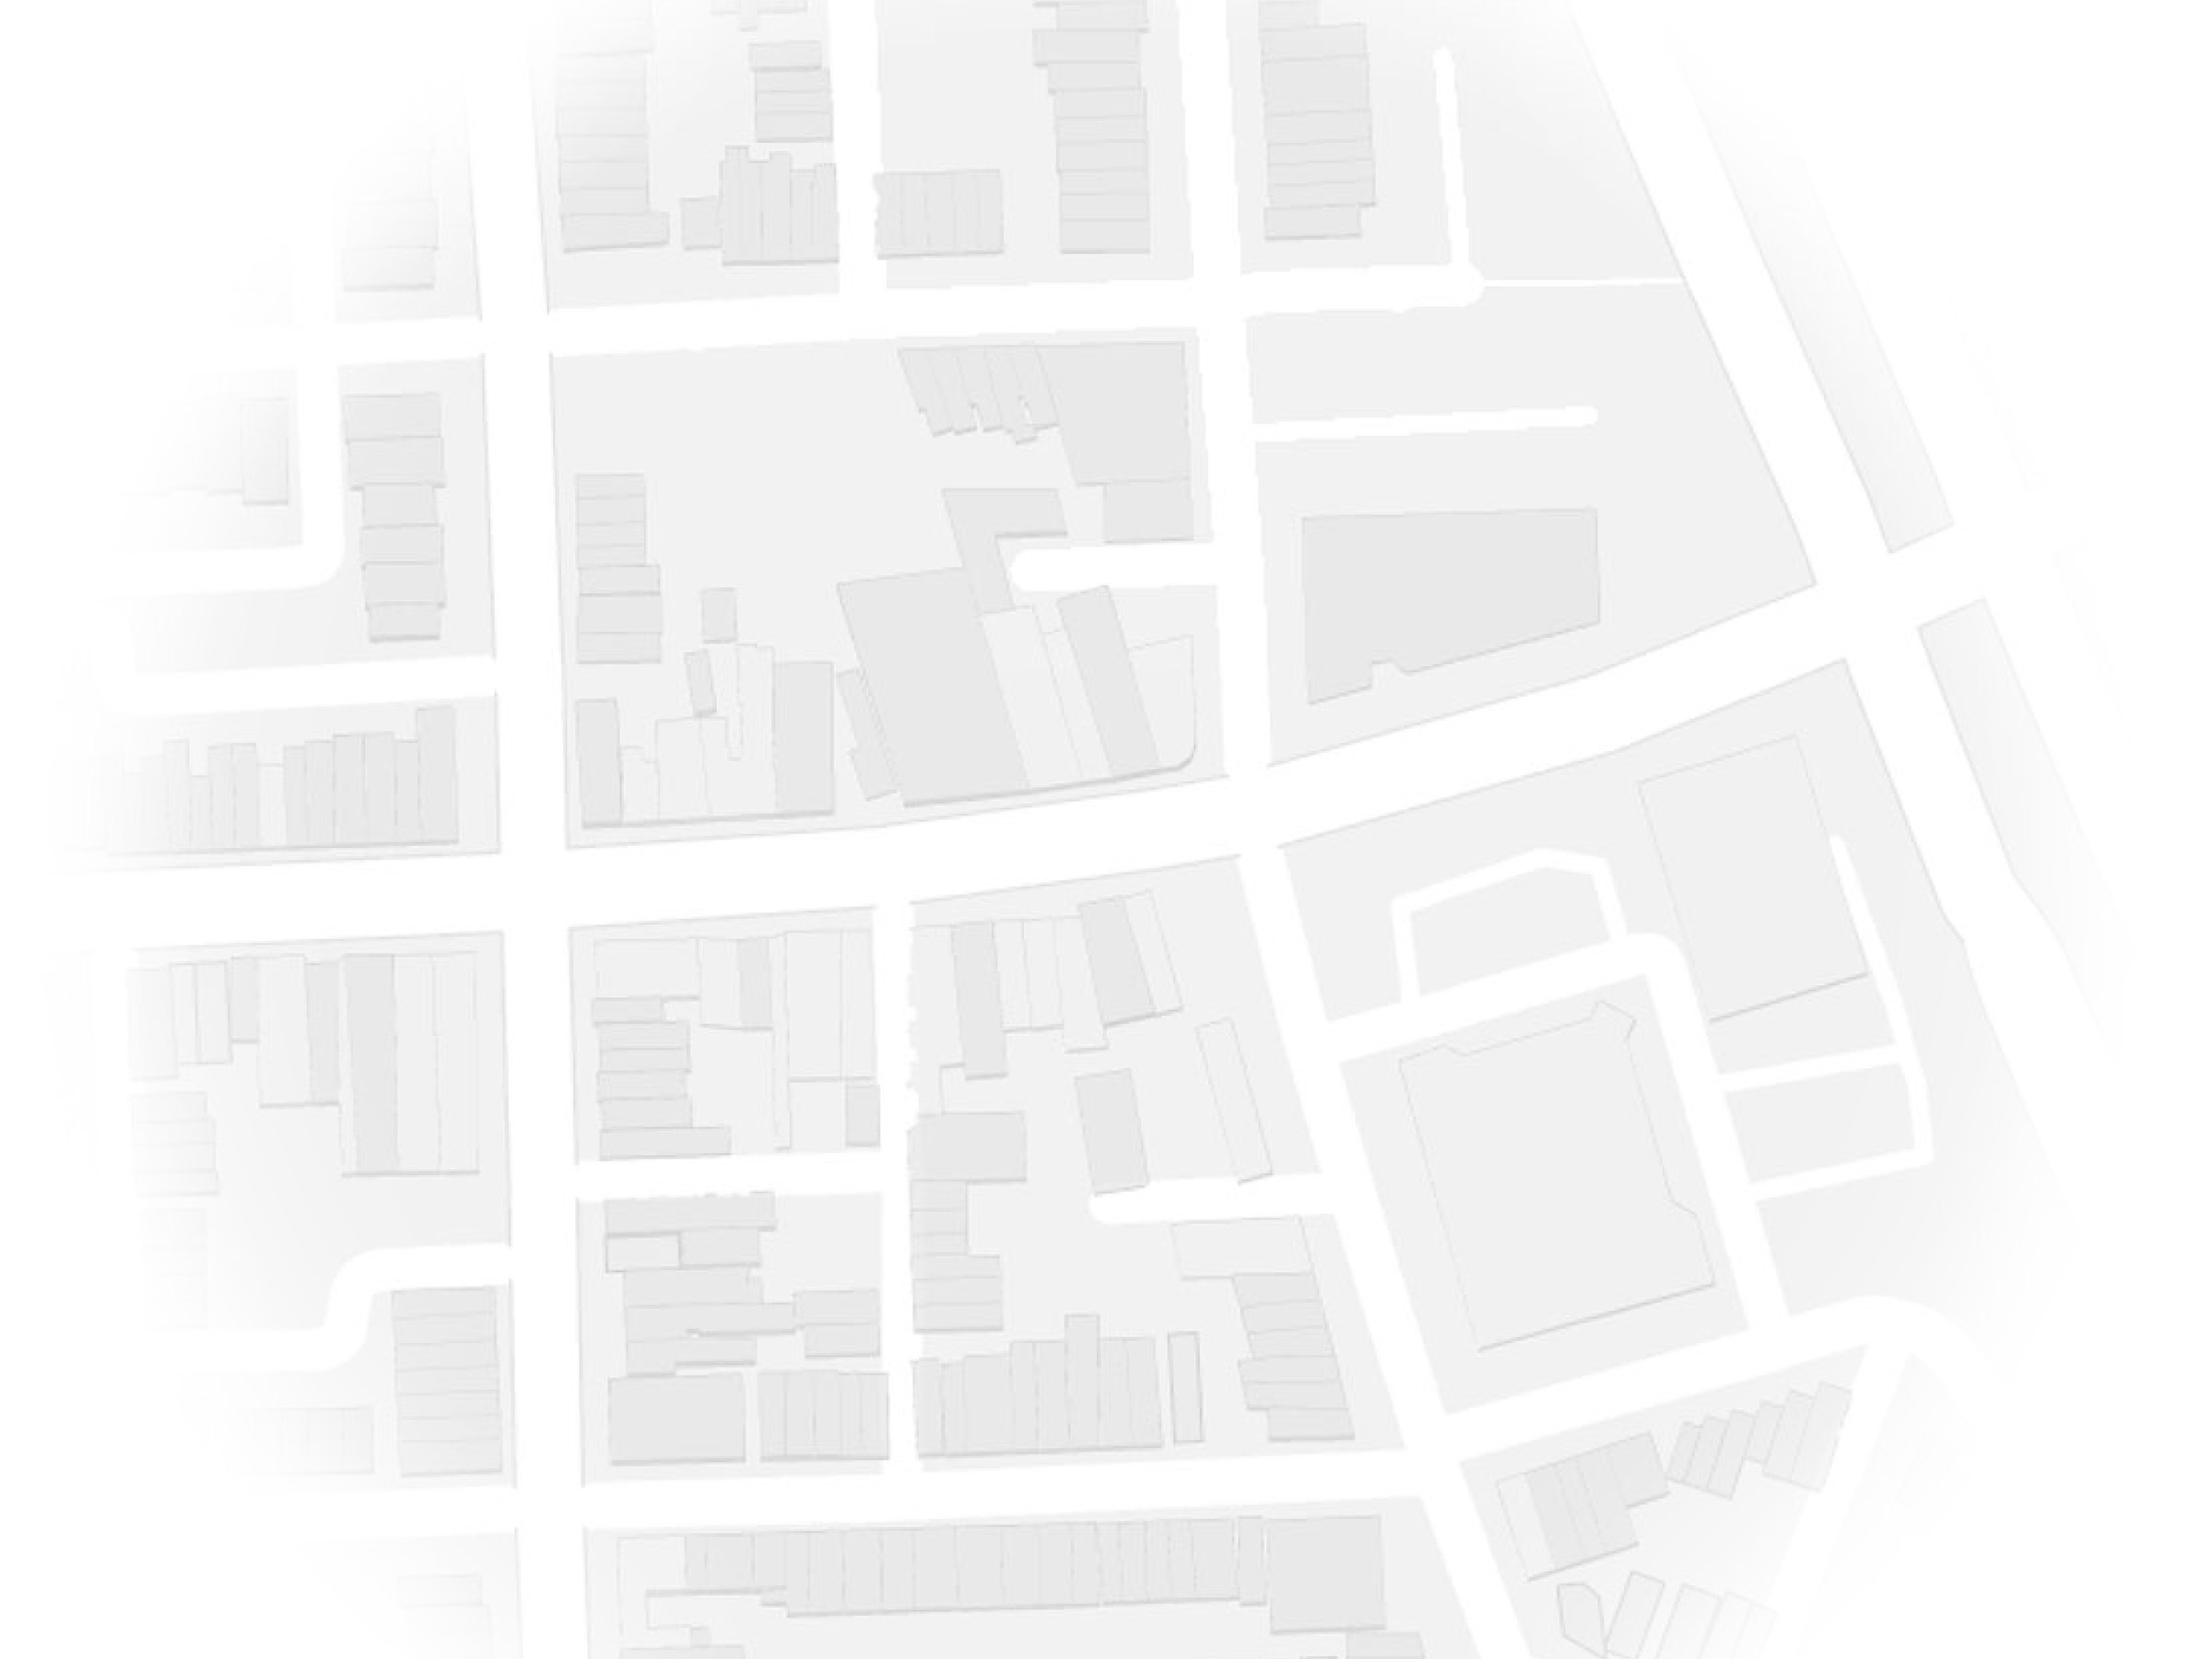 Stylized black and white map of Pigtown, Baltimore.